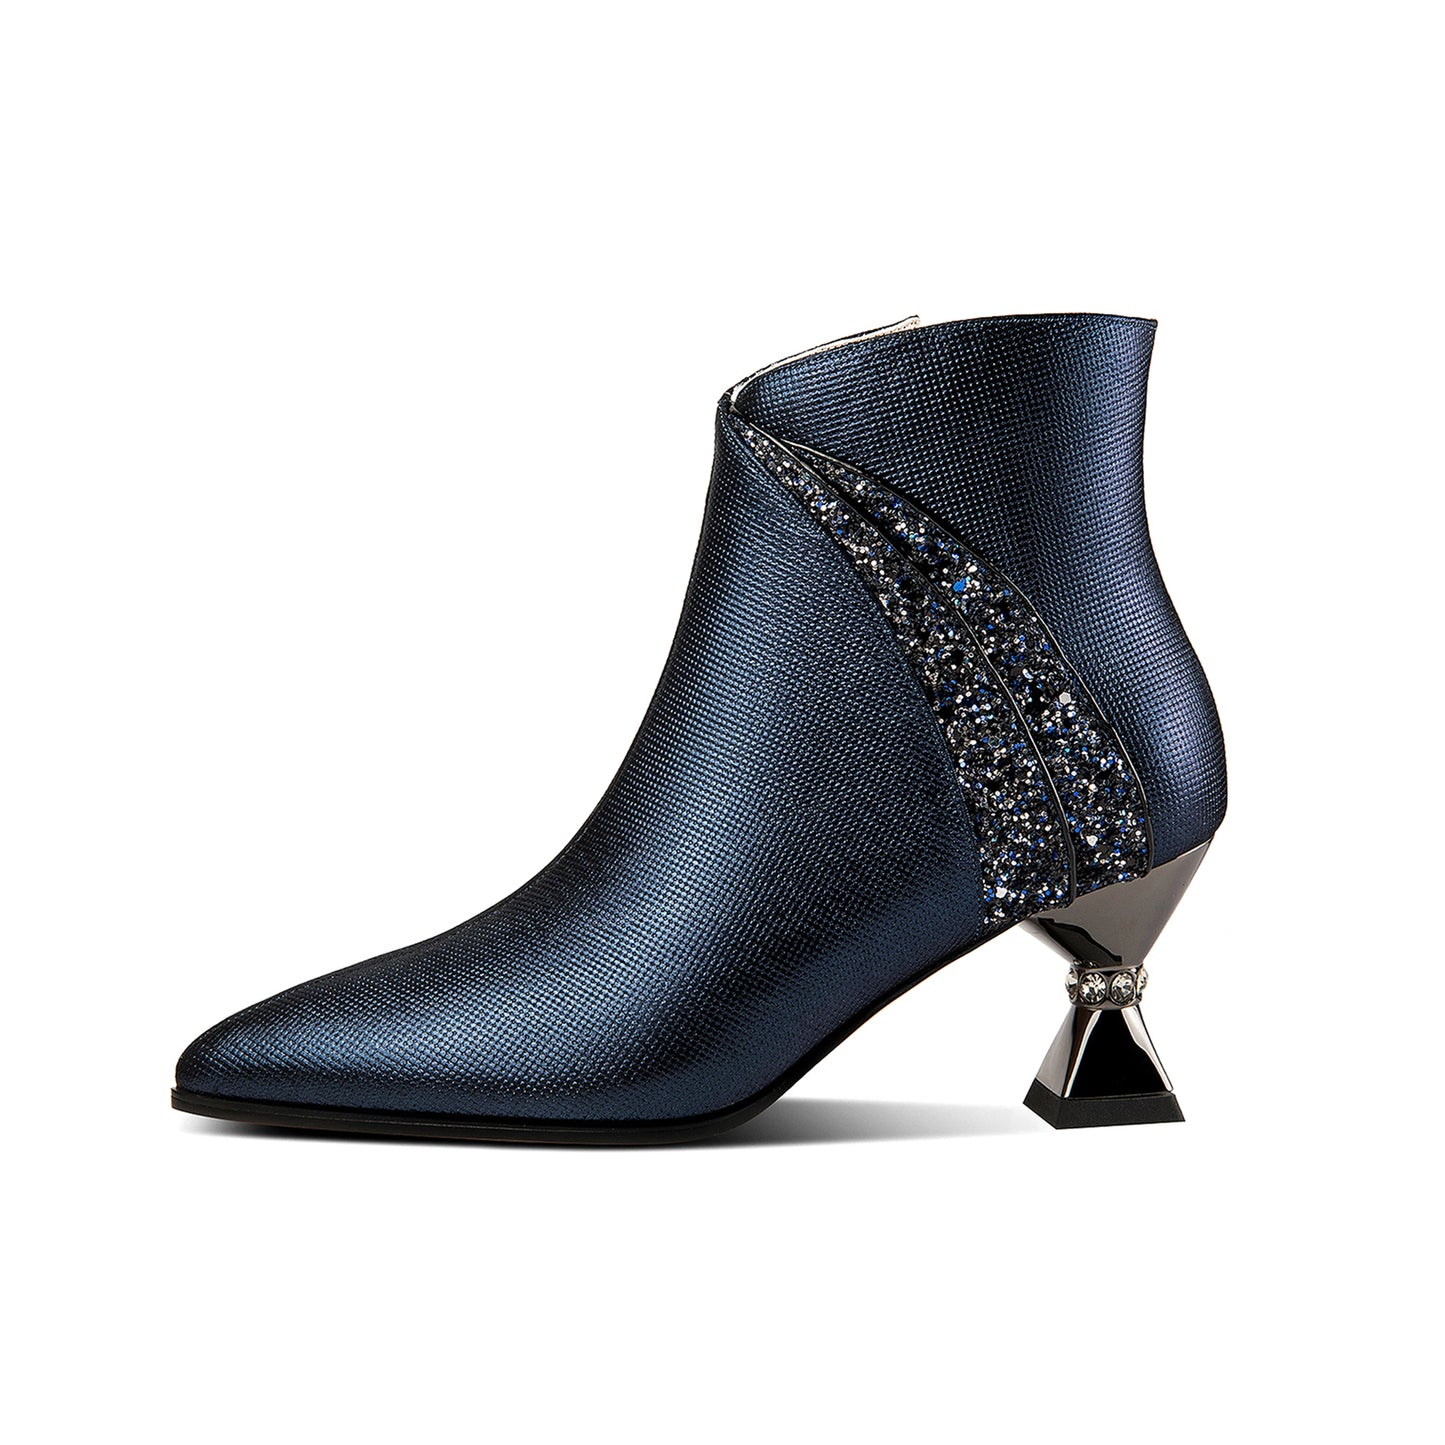 TinaCus Handmade Women's Genuine Leather Rhinestones Woven Design Pointed Toe Side Zipper Mid Spool Heel Ankle Boots